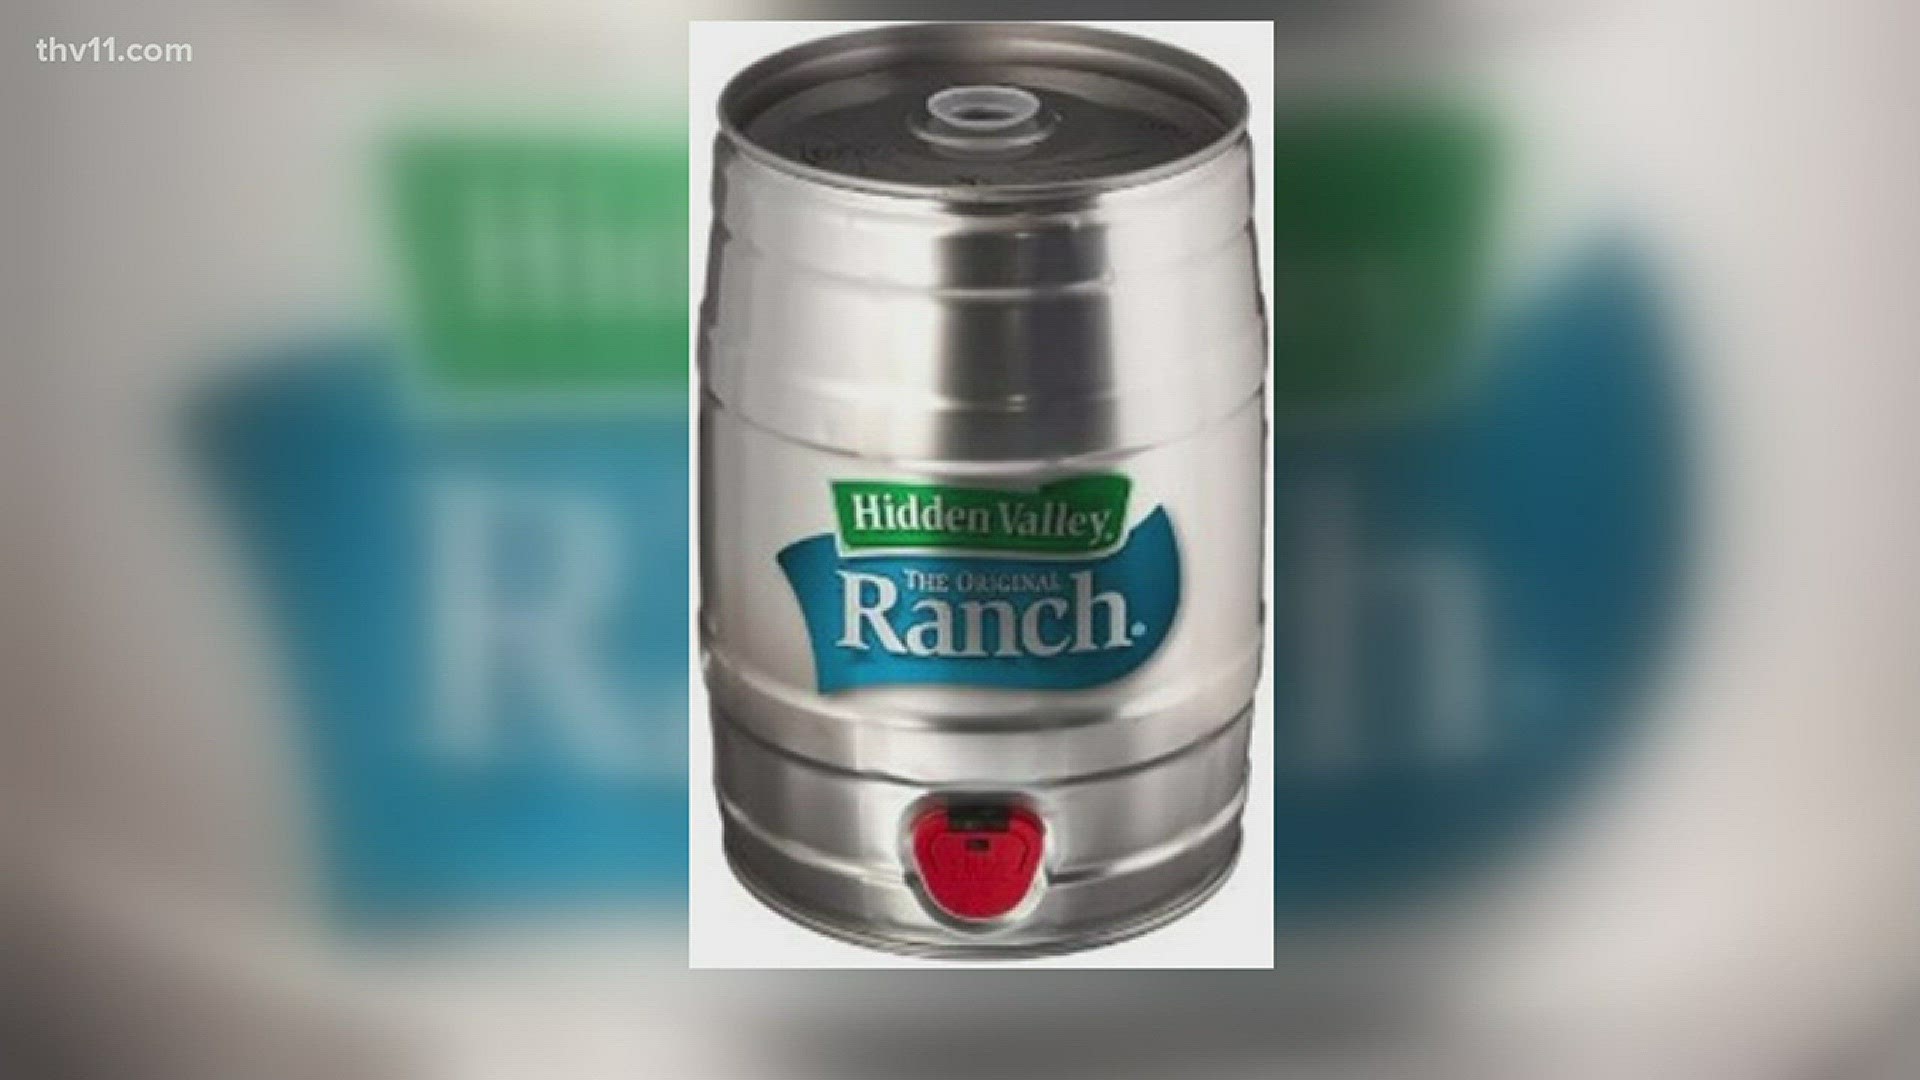 Hidden Valley is offering kegs of ranch dressing for the holidays but that's not the only gift items in the collection.